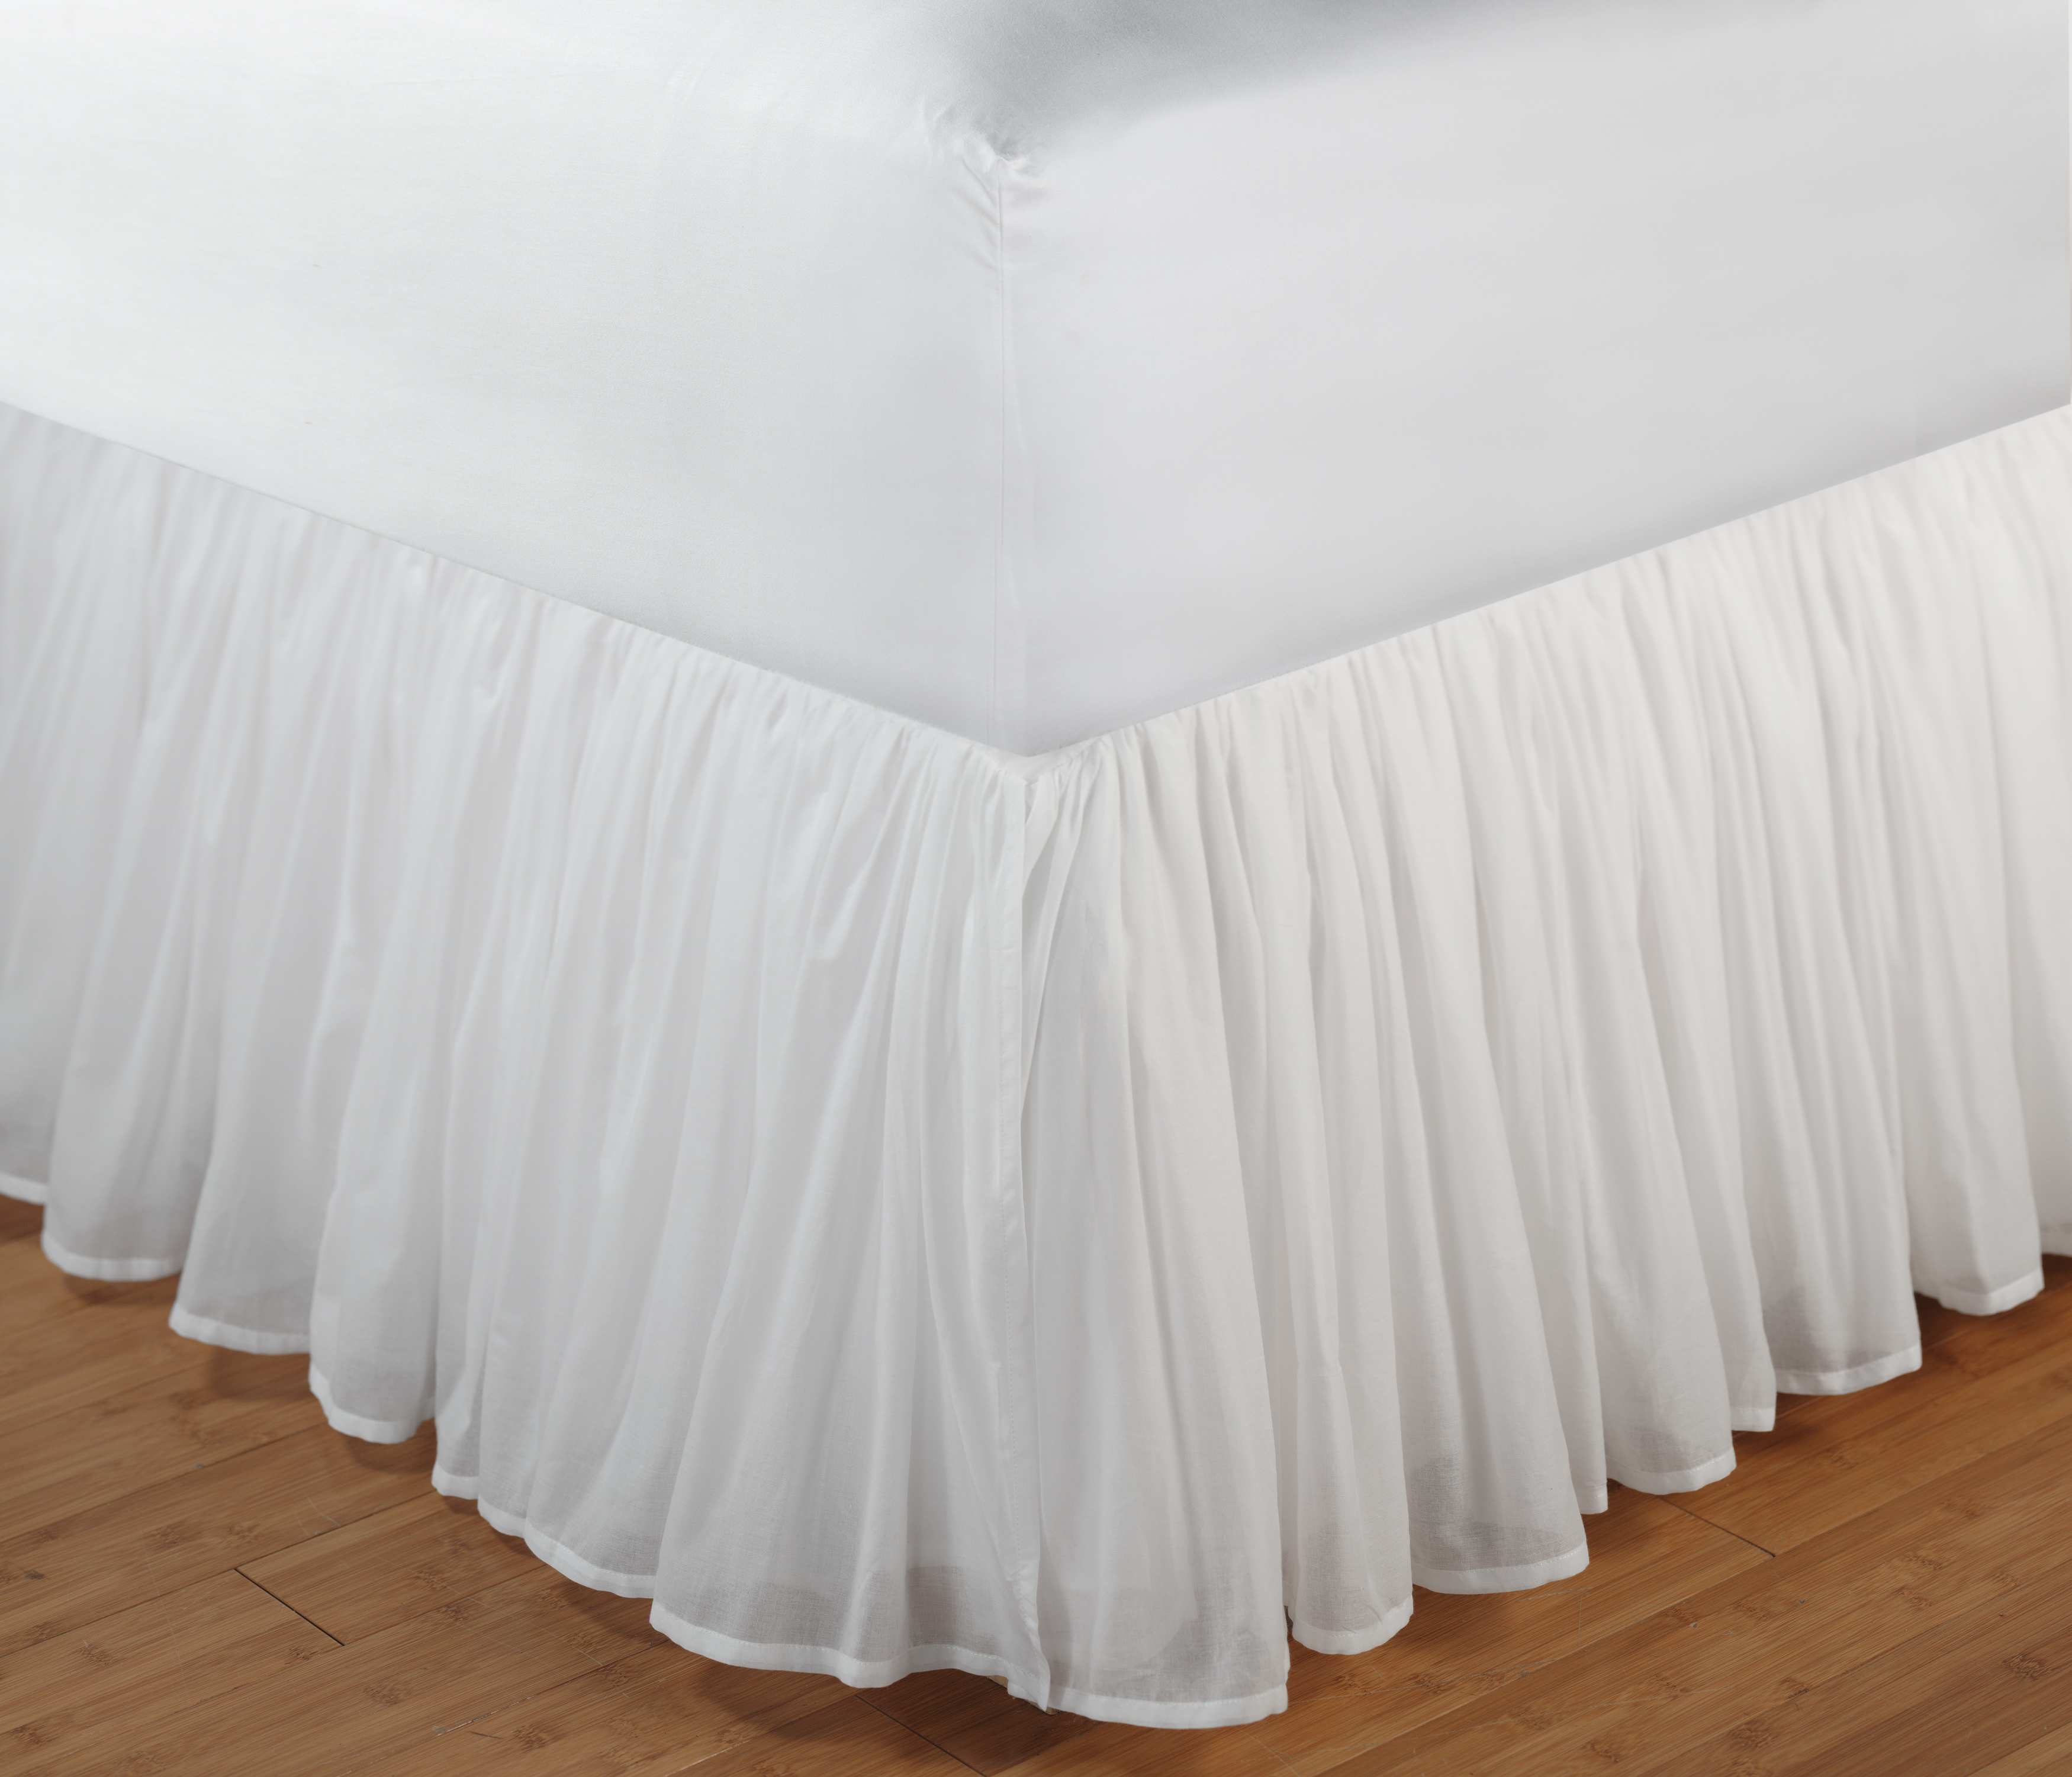 Greenland Home Fashions Cotton VoileWhiteBed Skirt 18King, White